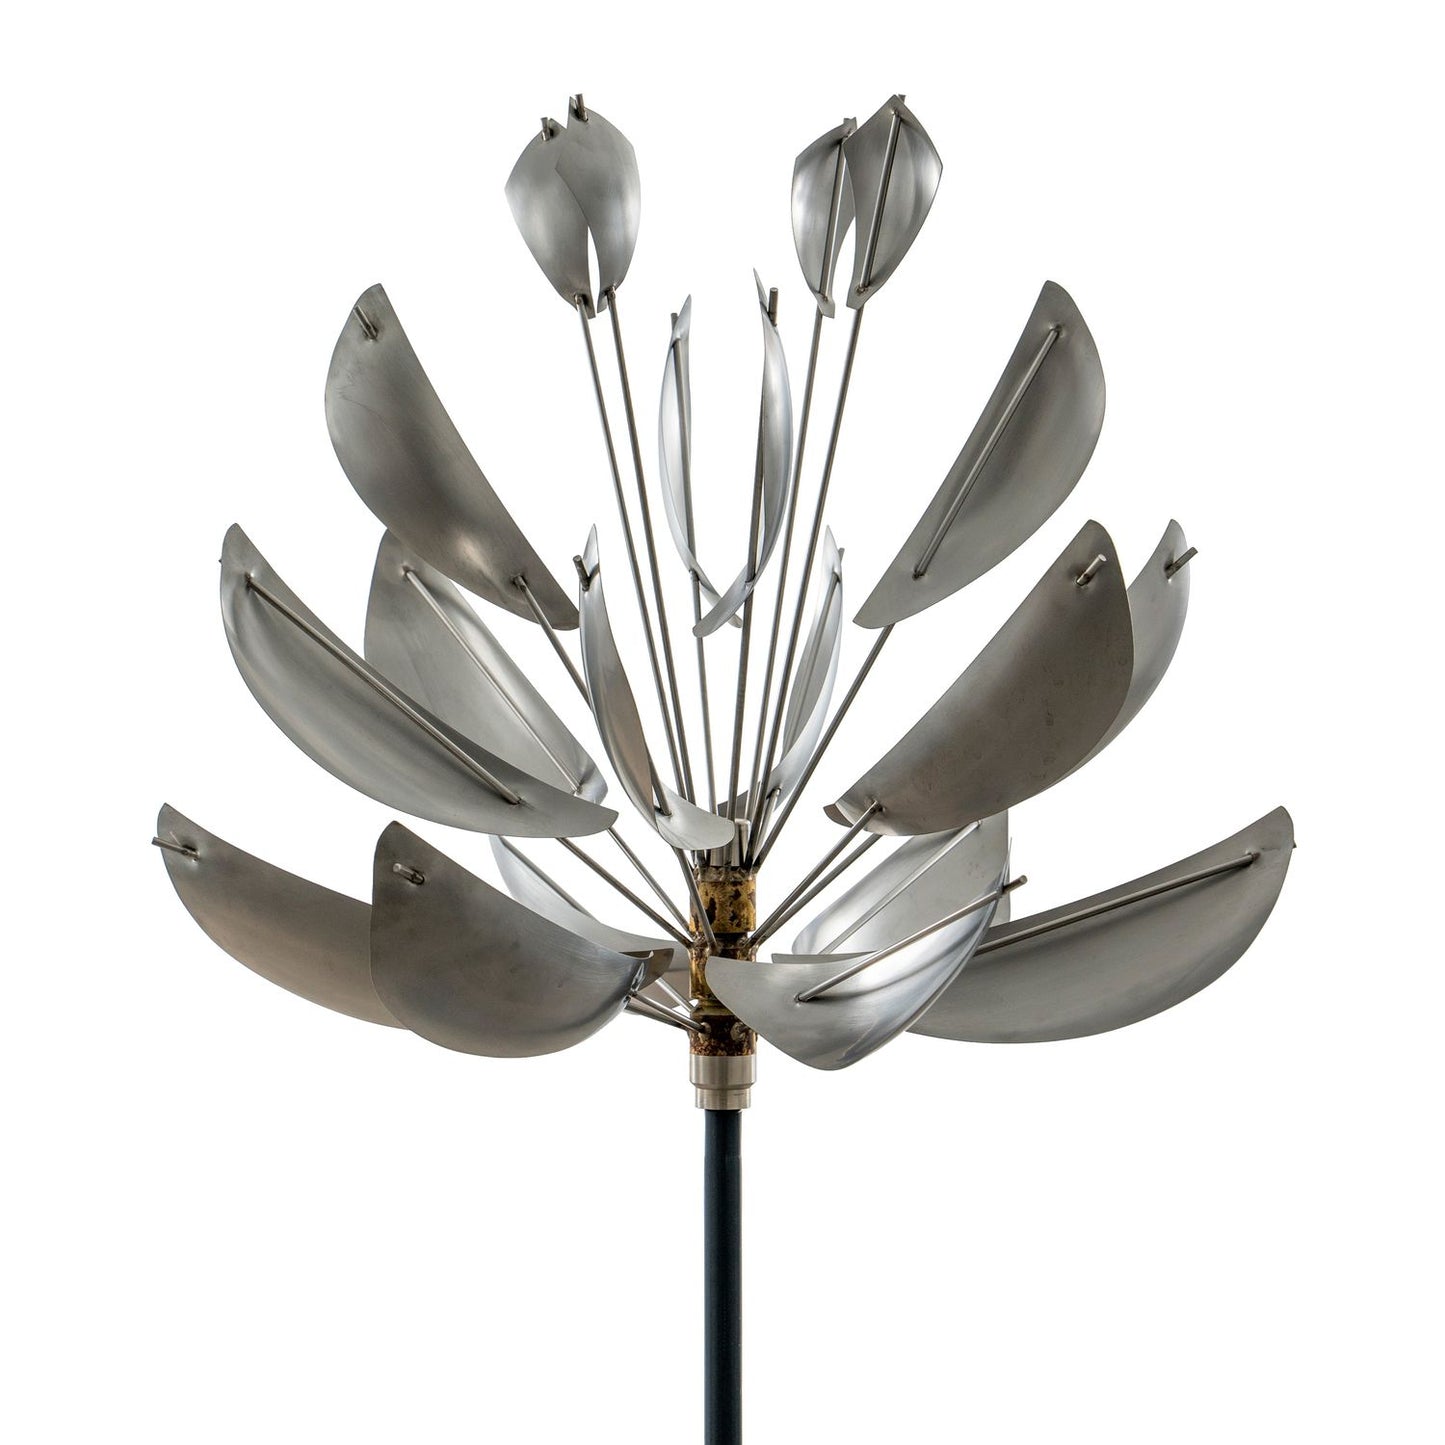 Agave, stainless steel